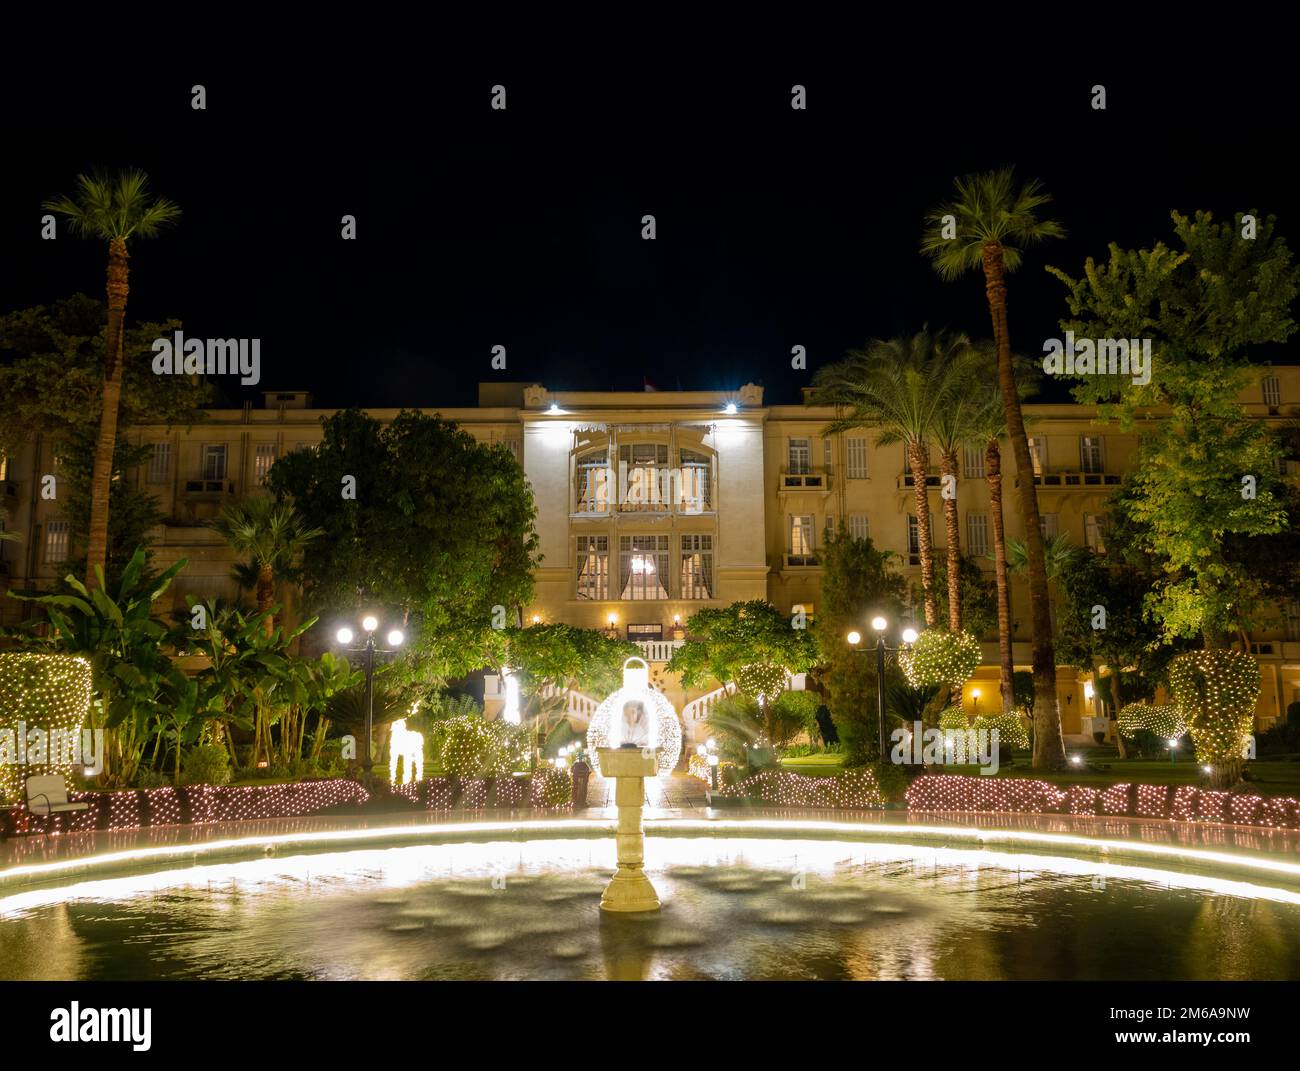 The floodlit garden of the Winter Palace Hotel Luxor Egypt during the Christmas season Stock Photo